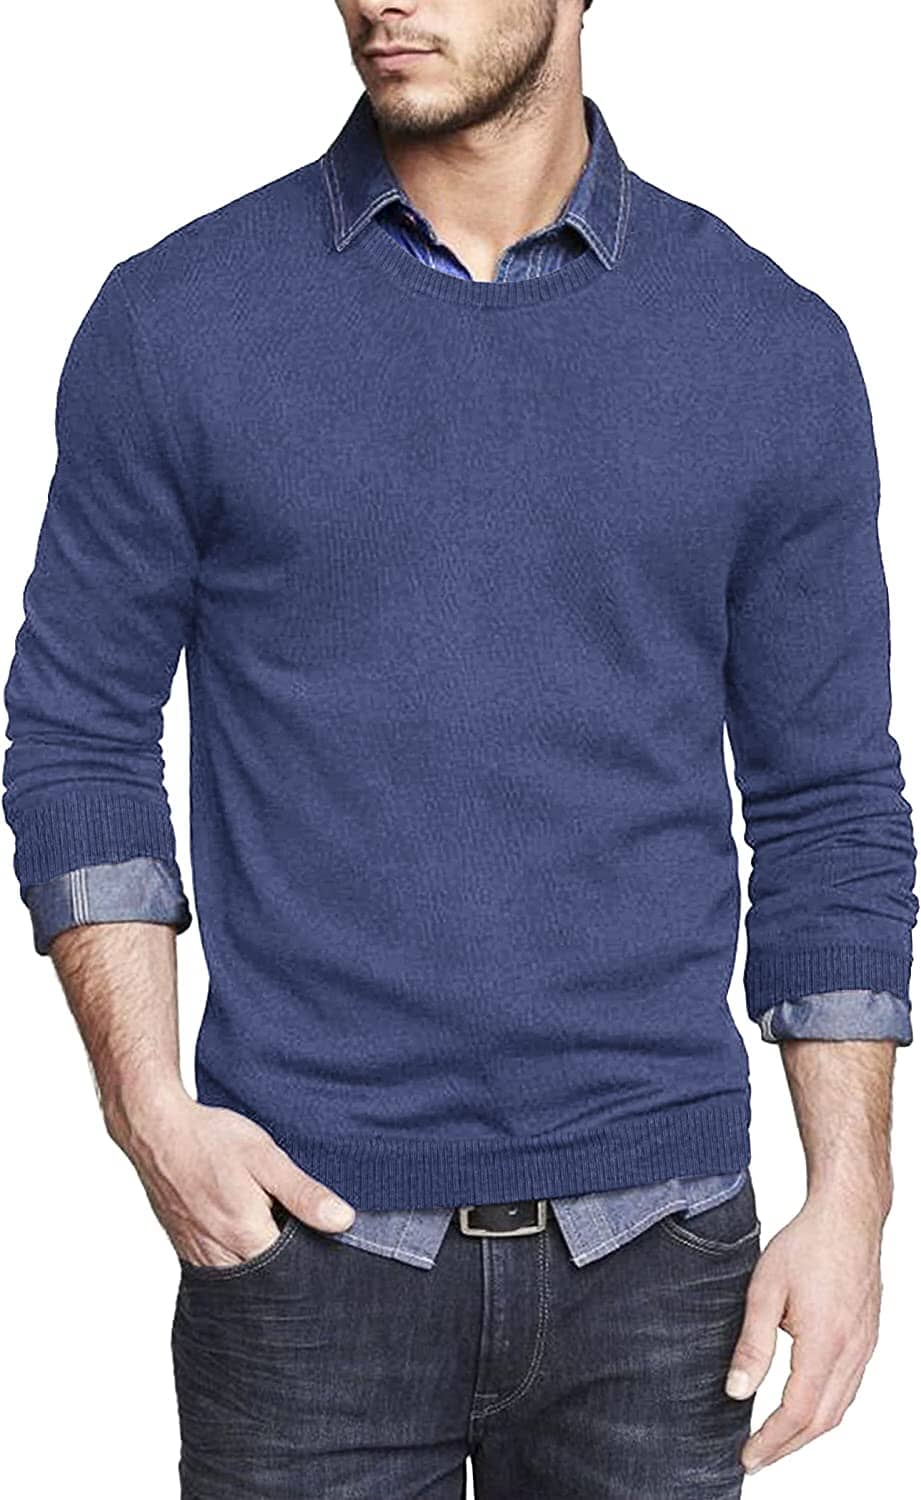 Solid Classic Crew Neck Sweater (US Only) Sweaters COOFANDY Store Royal Blue S 